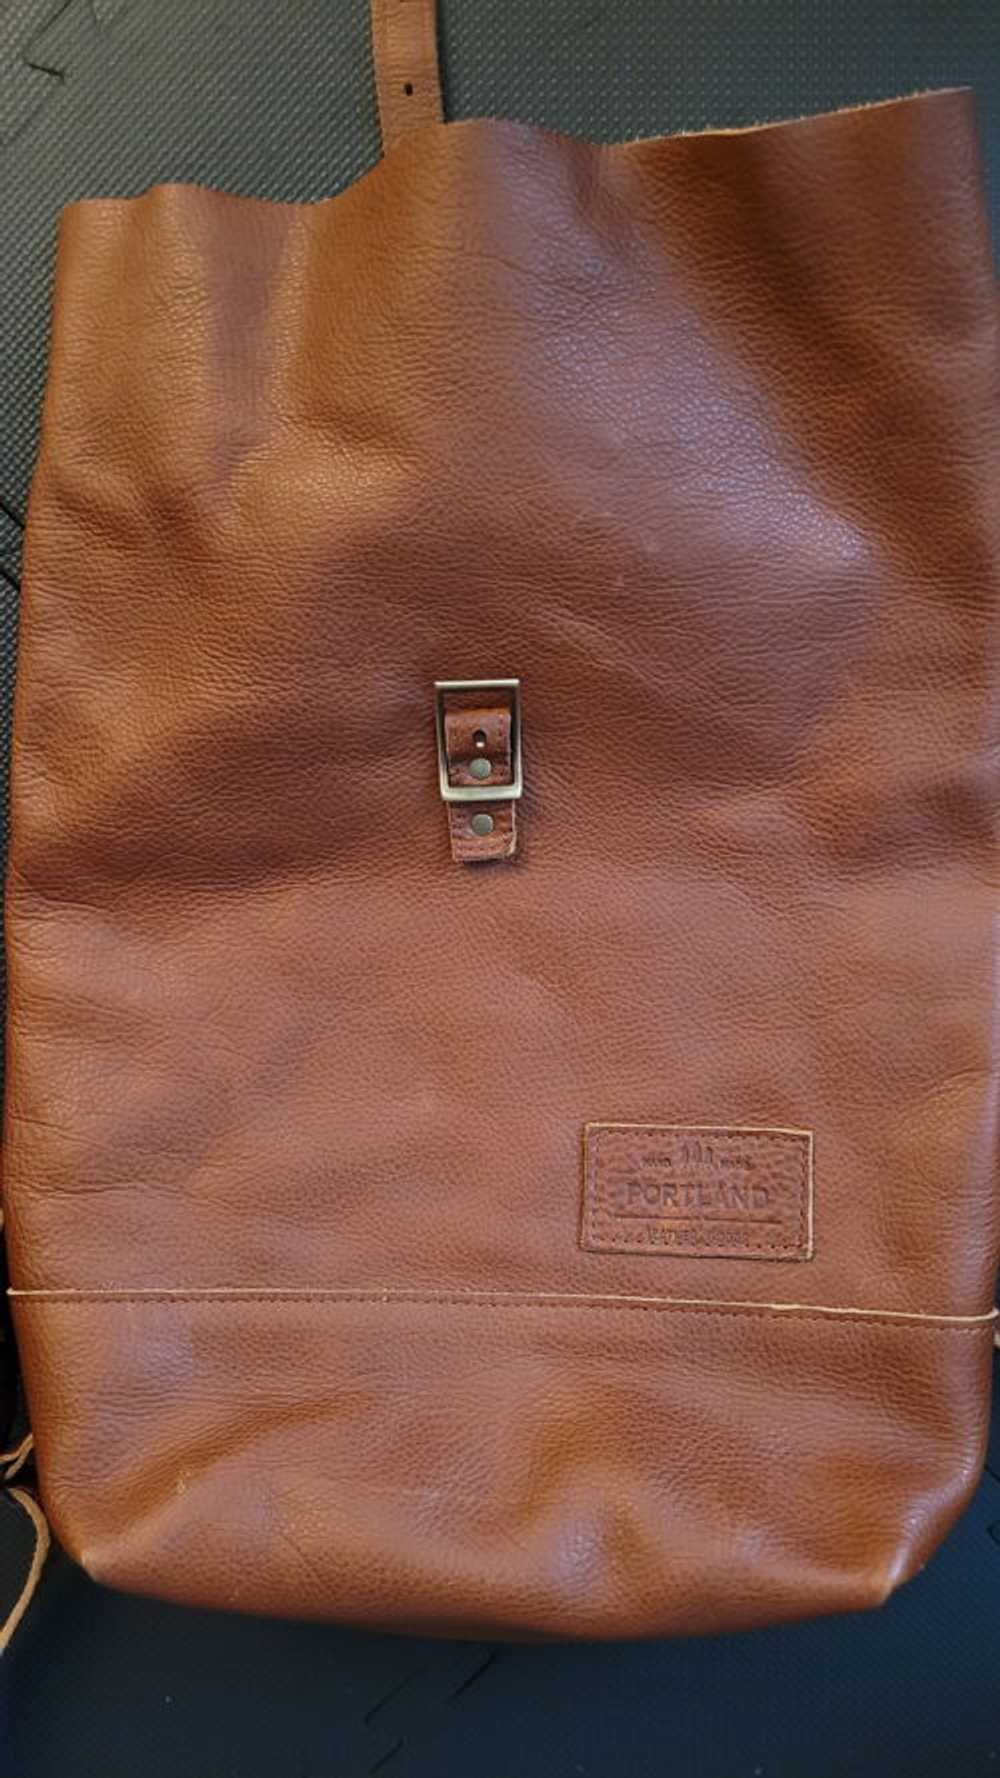 Portland Leather Leather Rolltop Backpack - image 5